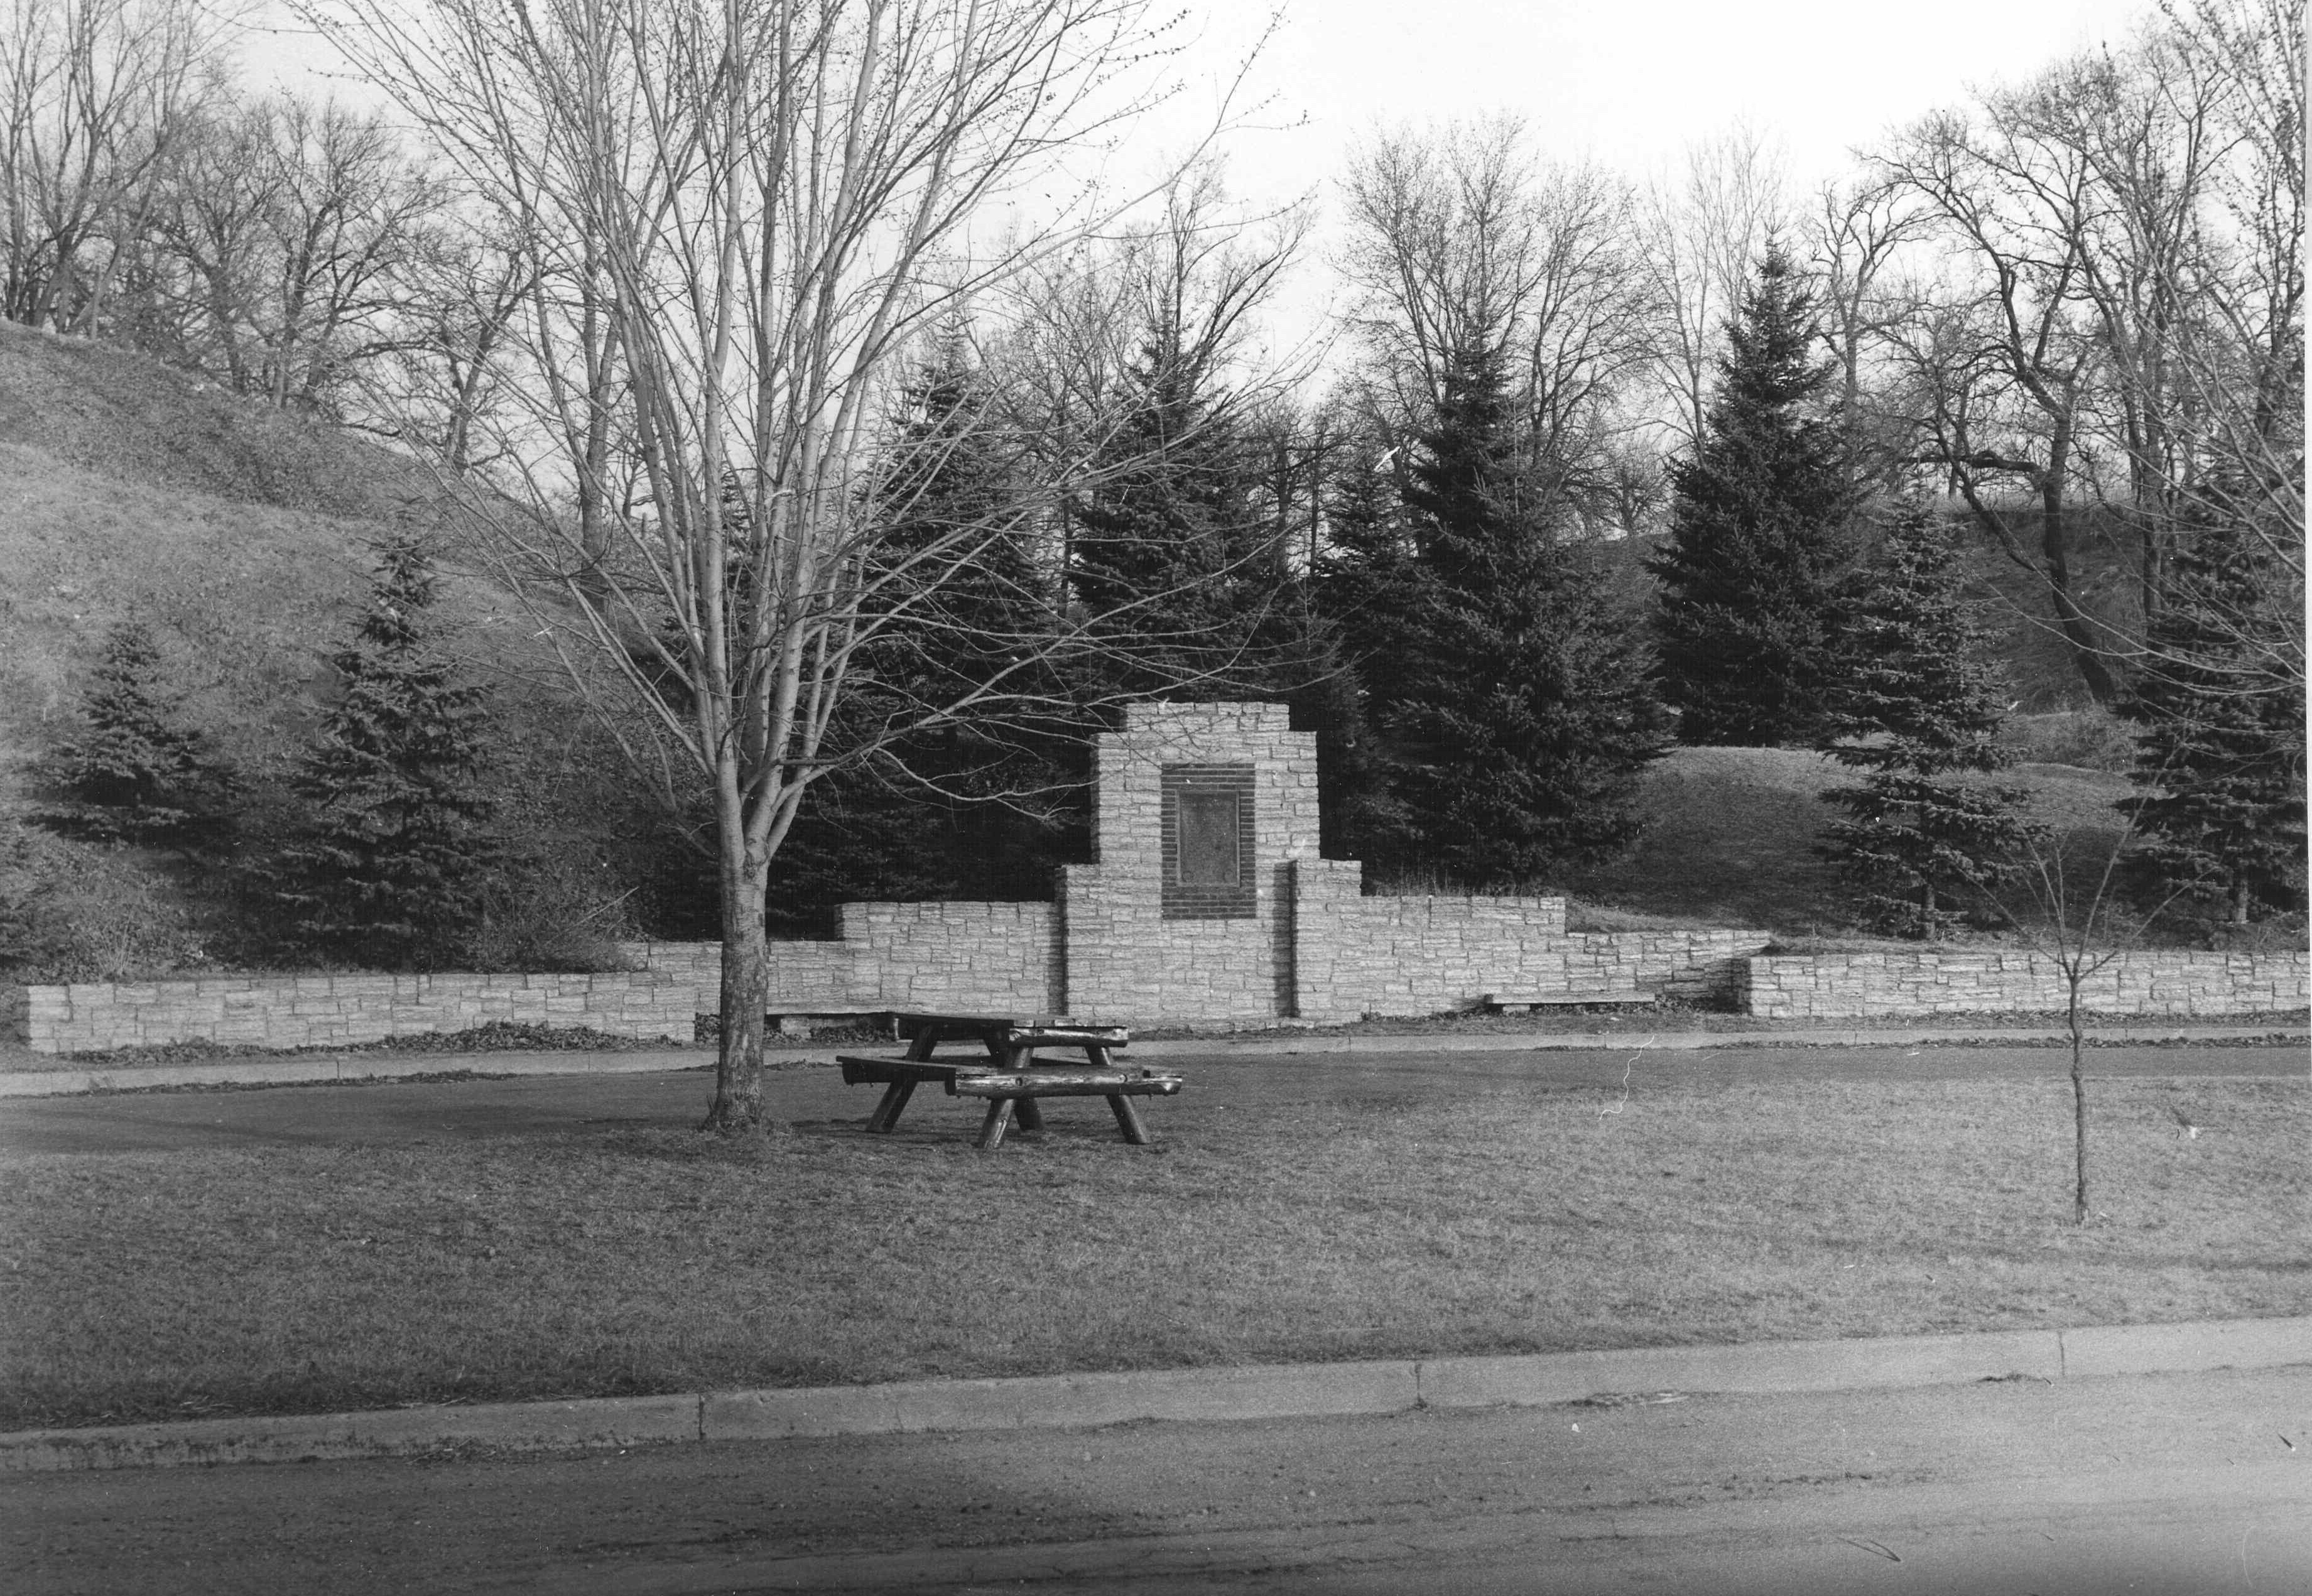 This Chaska Historic Marker first appeared in the 1940s. It is pictured here shortly after original construction in 1942.